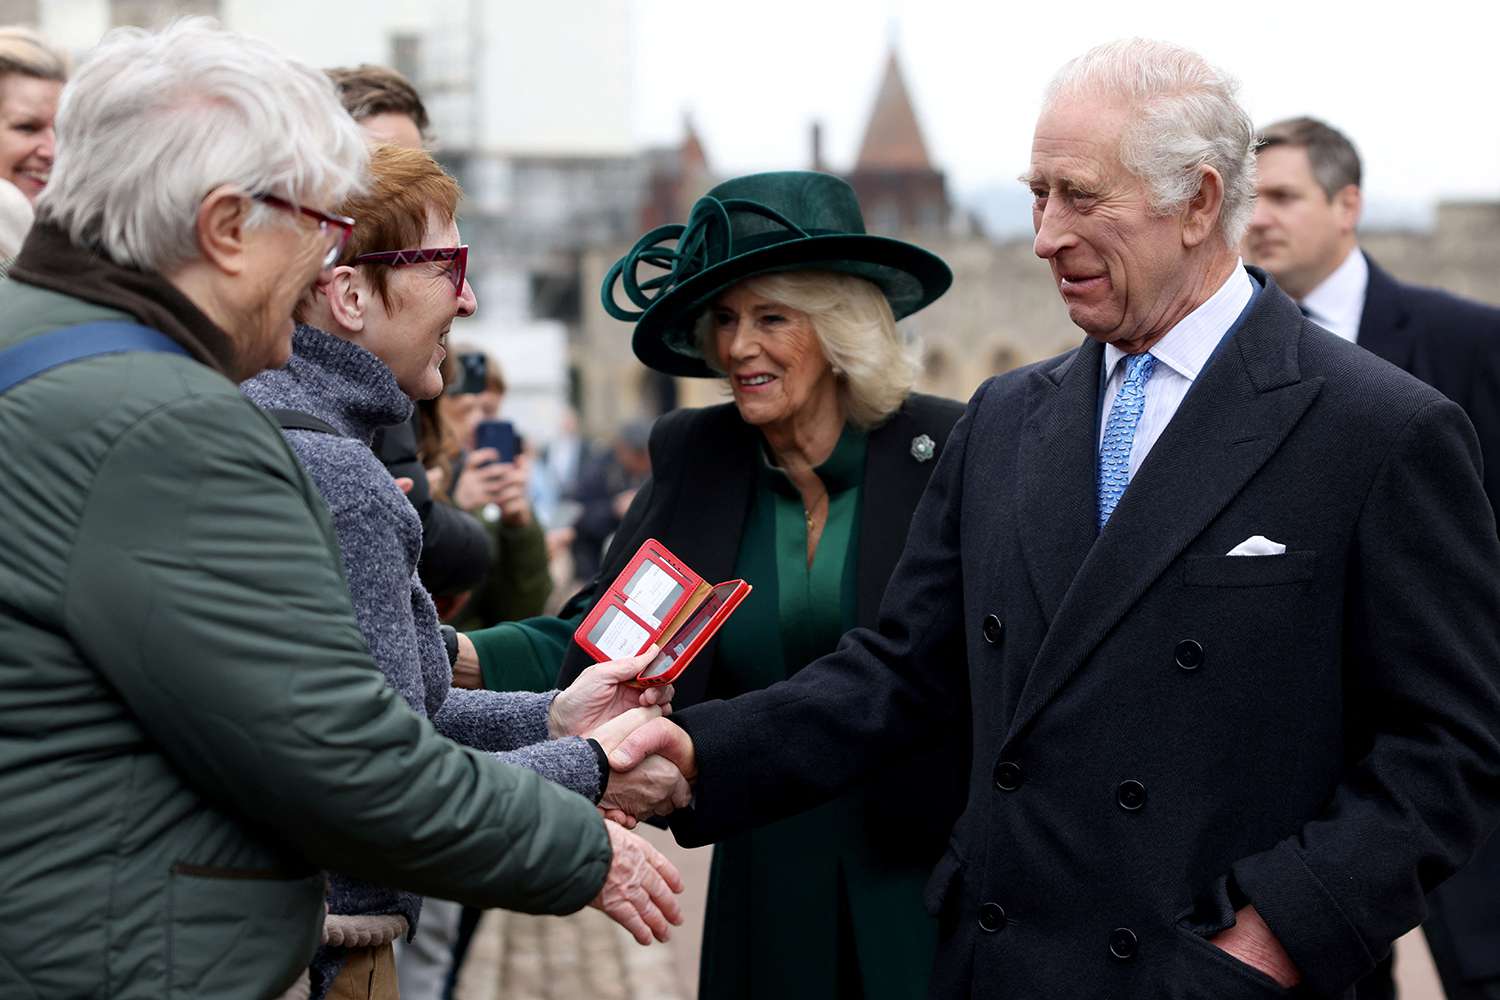 King Charles III and Queen Camilla greet people after attending the Easter Matins Service at St. George's Chapel, Windsor Castle